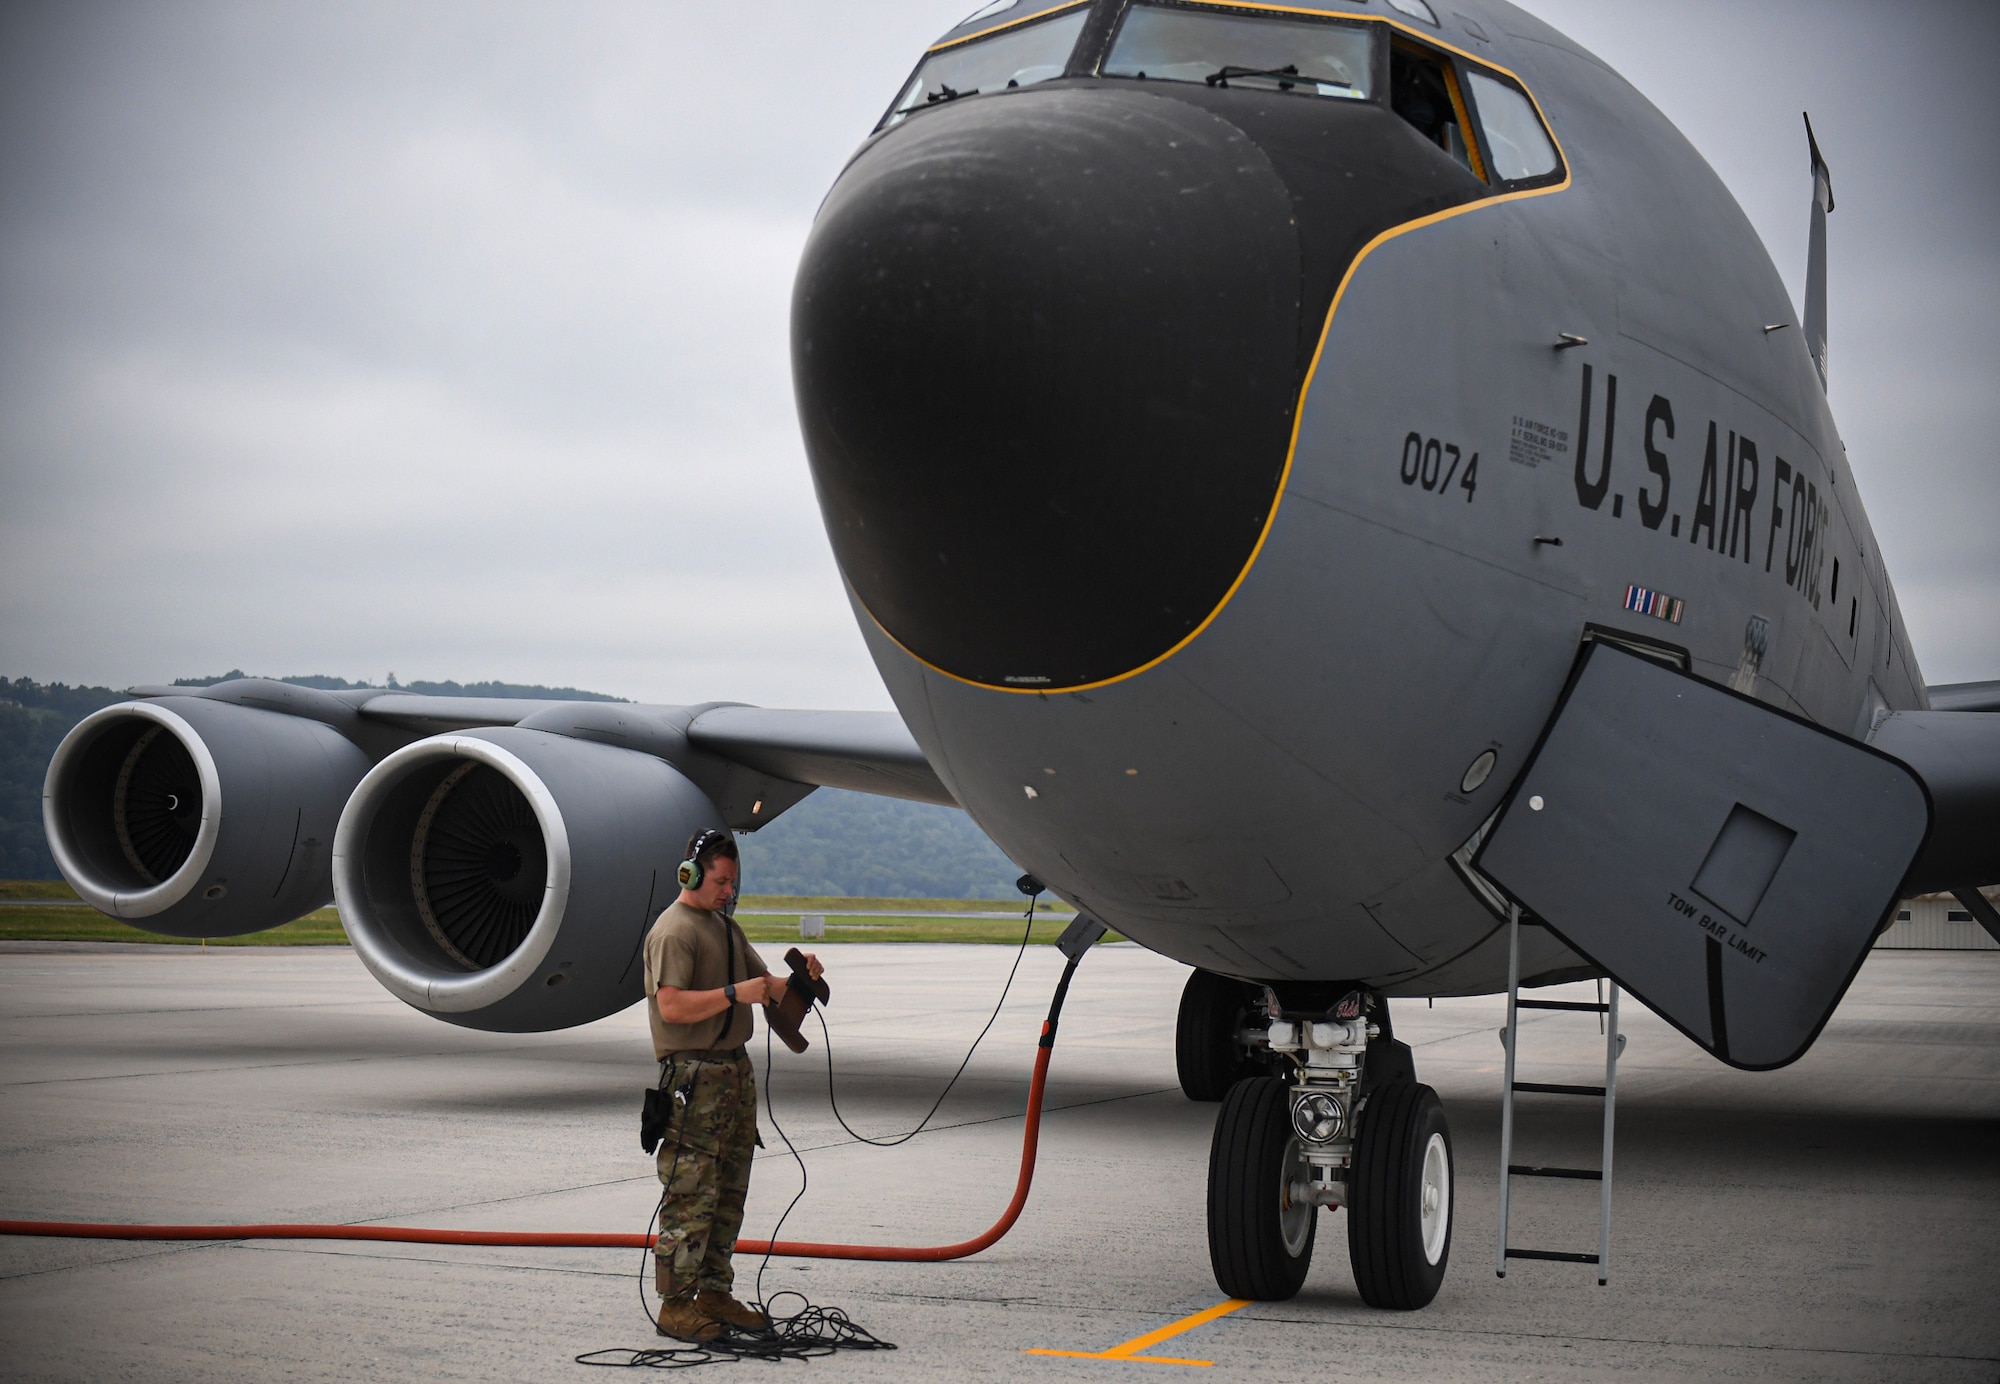 Pennsylvania Air National Guard Airmen arrive in Middletown, Pennsylvania on August 4 as part of Exercise Iron Keystone.